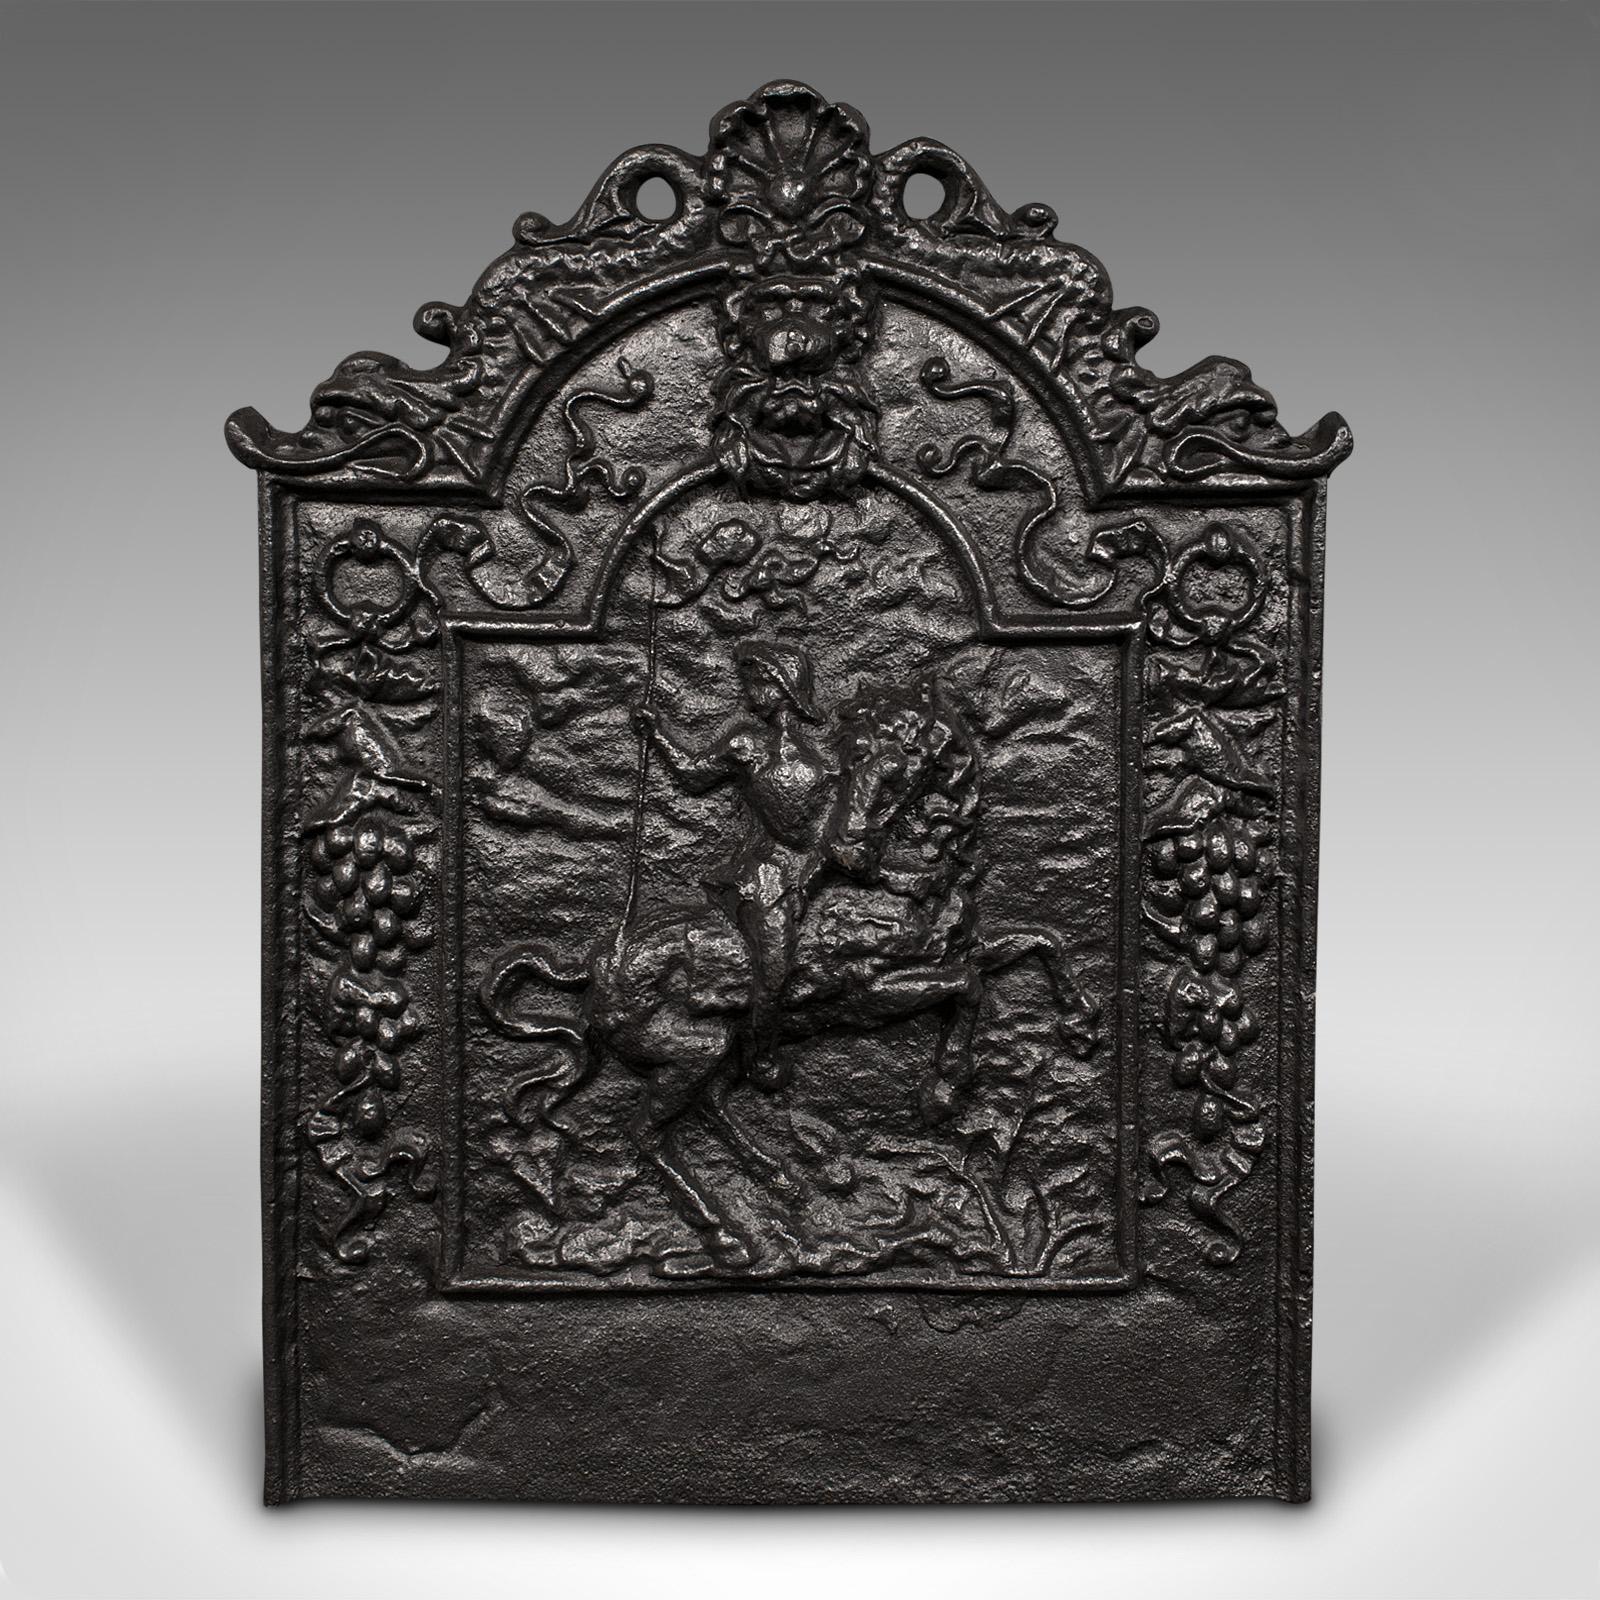 This is a heavy antique decorative fire back. An English, cast iron fireplace reflector with Lion Rampant relief, dating to the Georgian period, circa 1800.

Superb relief decor accentuates this substantial fire back
Displays a desirable aged patina